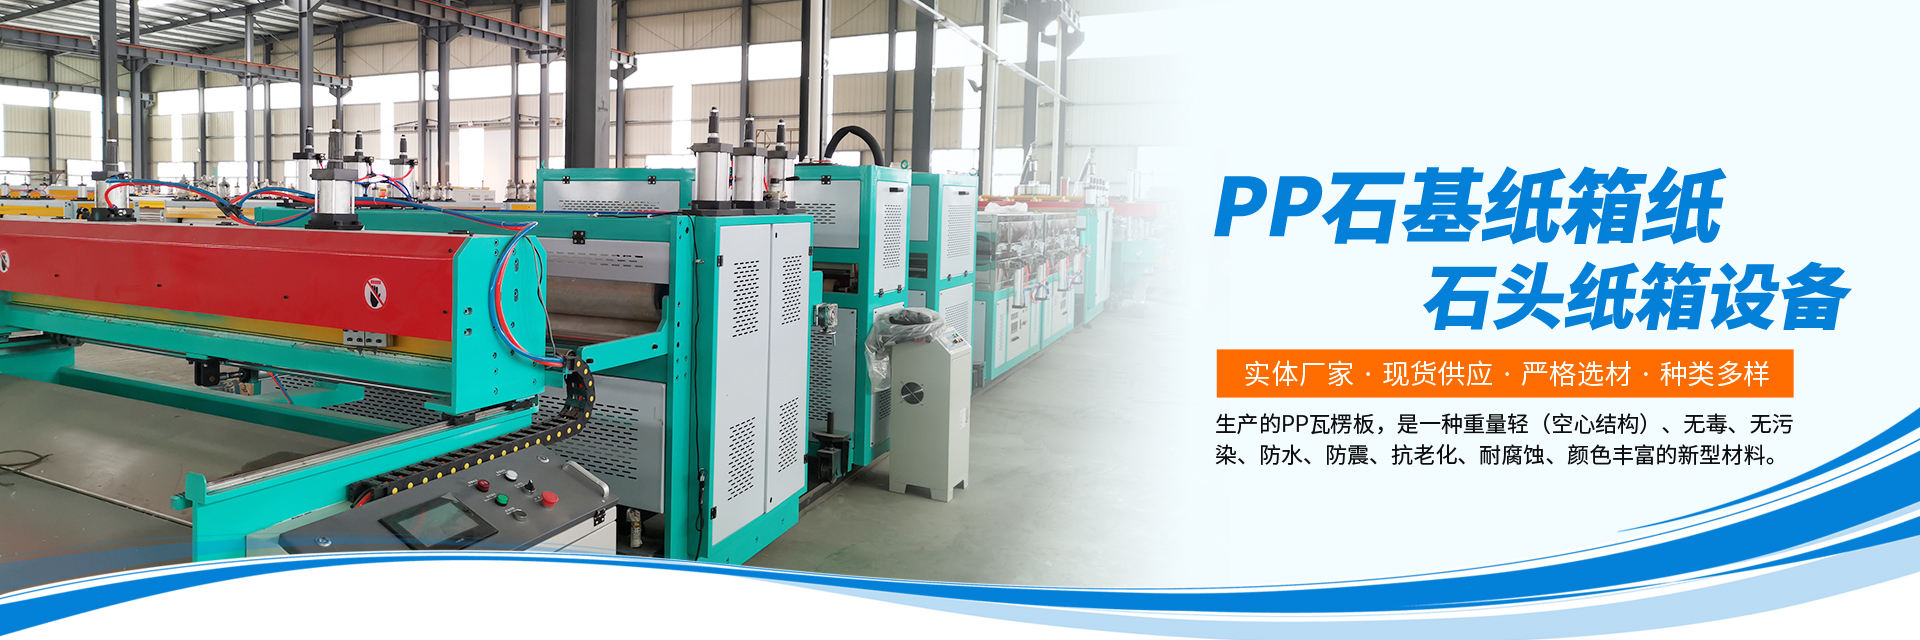 Calcium plastic packaging board production line